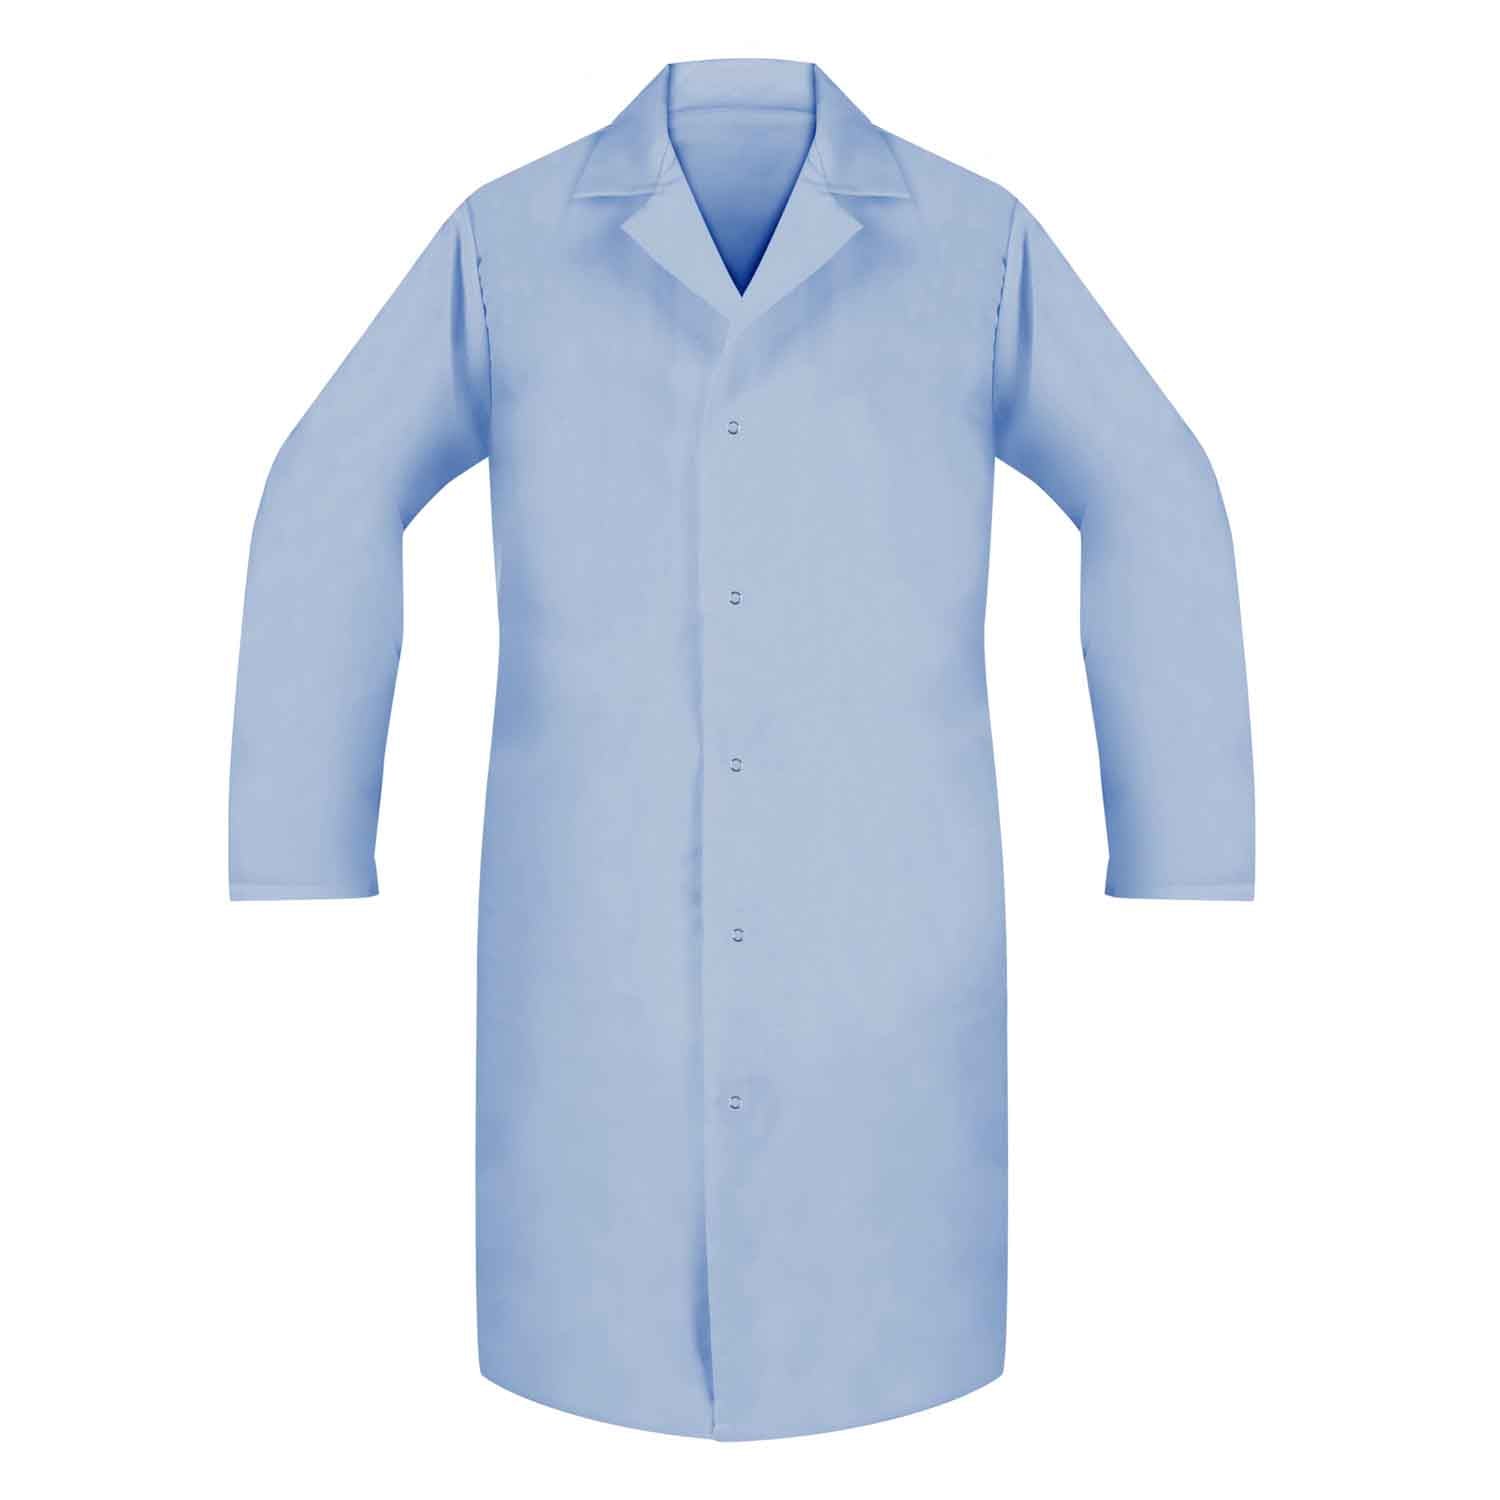 American Dawn | X-Small Light Blue Lab Coat With Long Sleeves And No Pockets